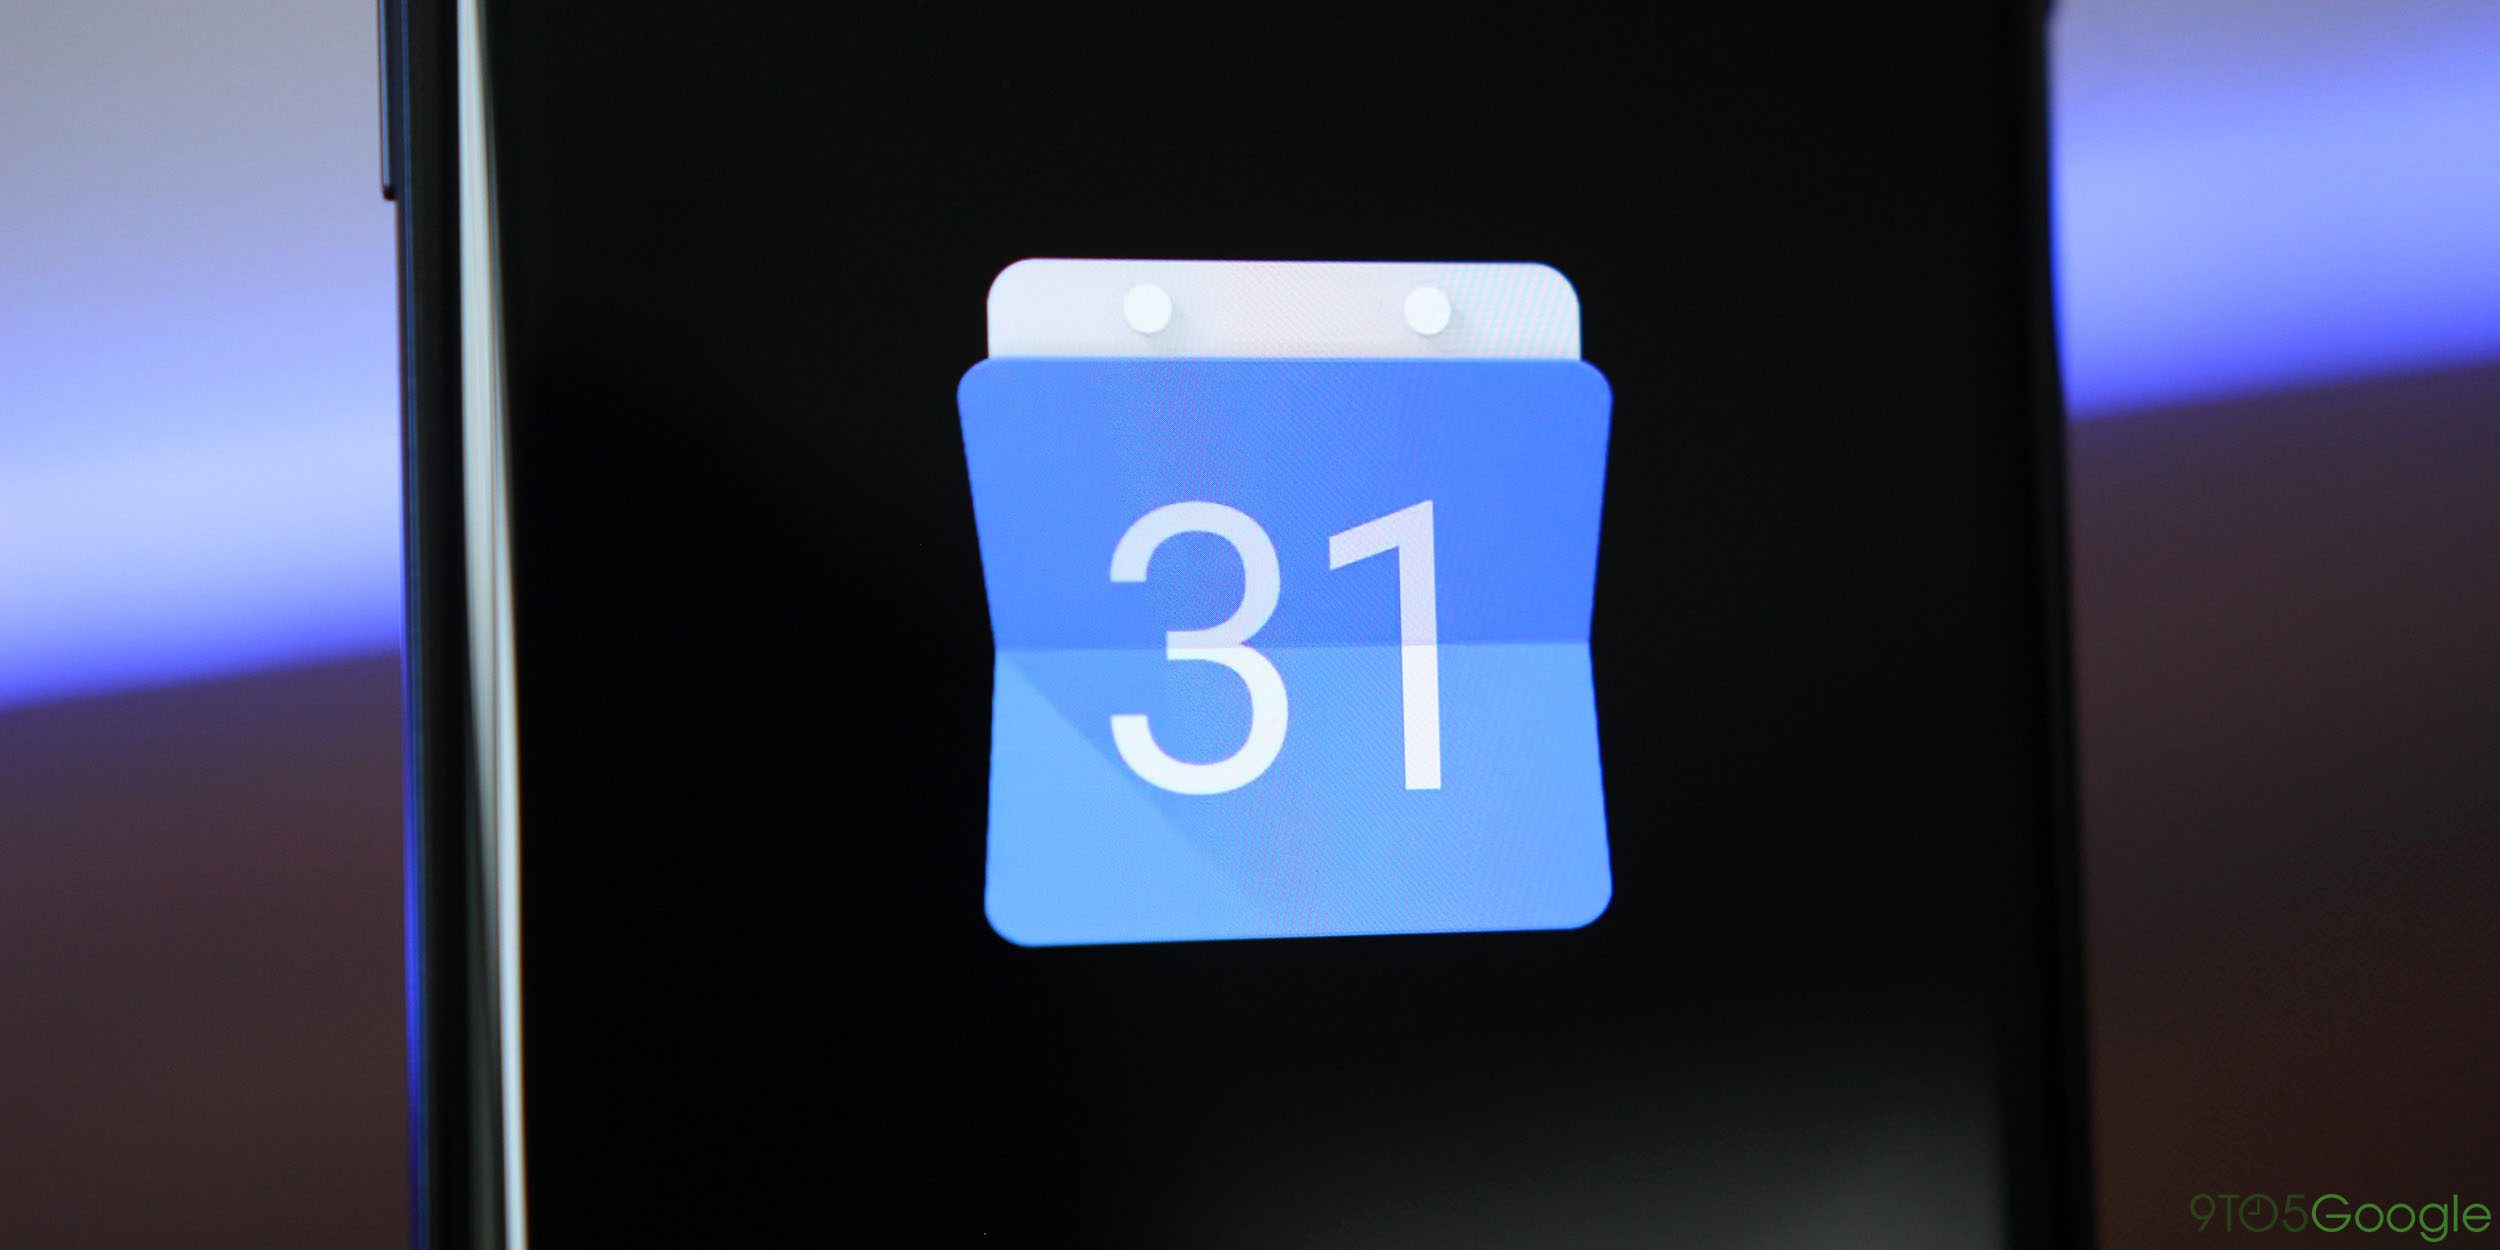 Short Google Calendar events will no longer be displayed as 30minutes